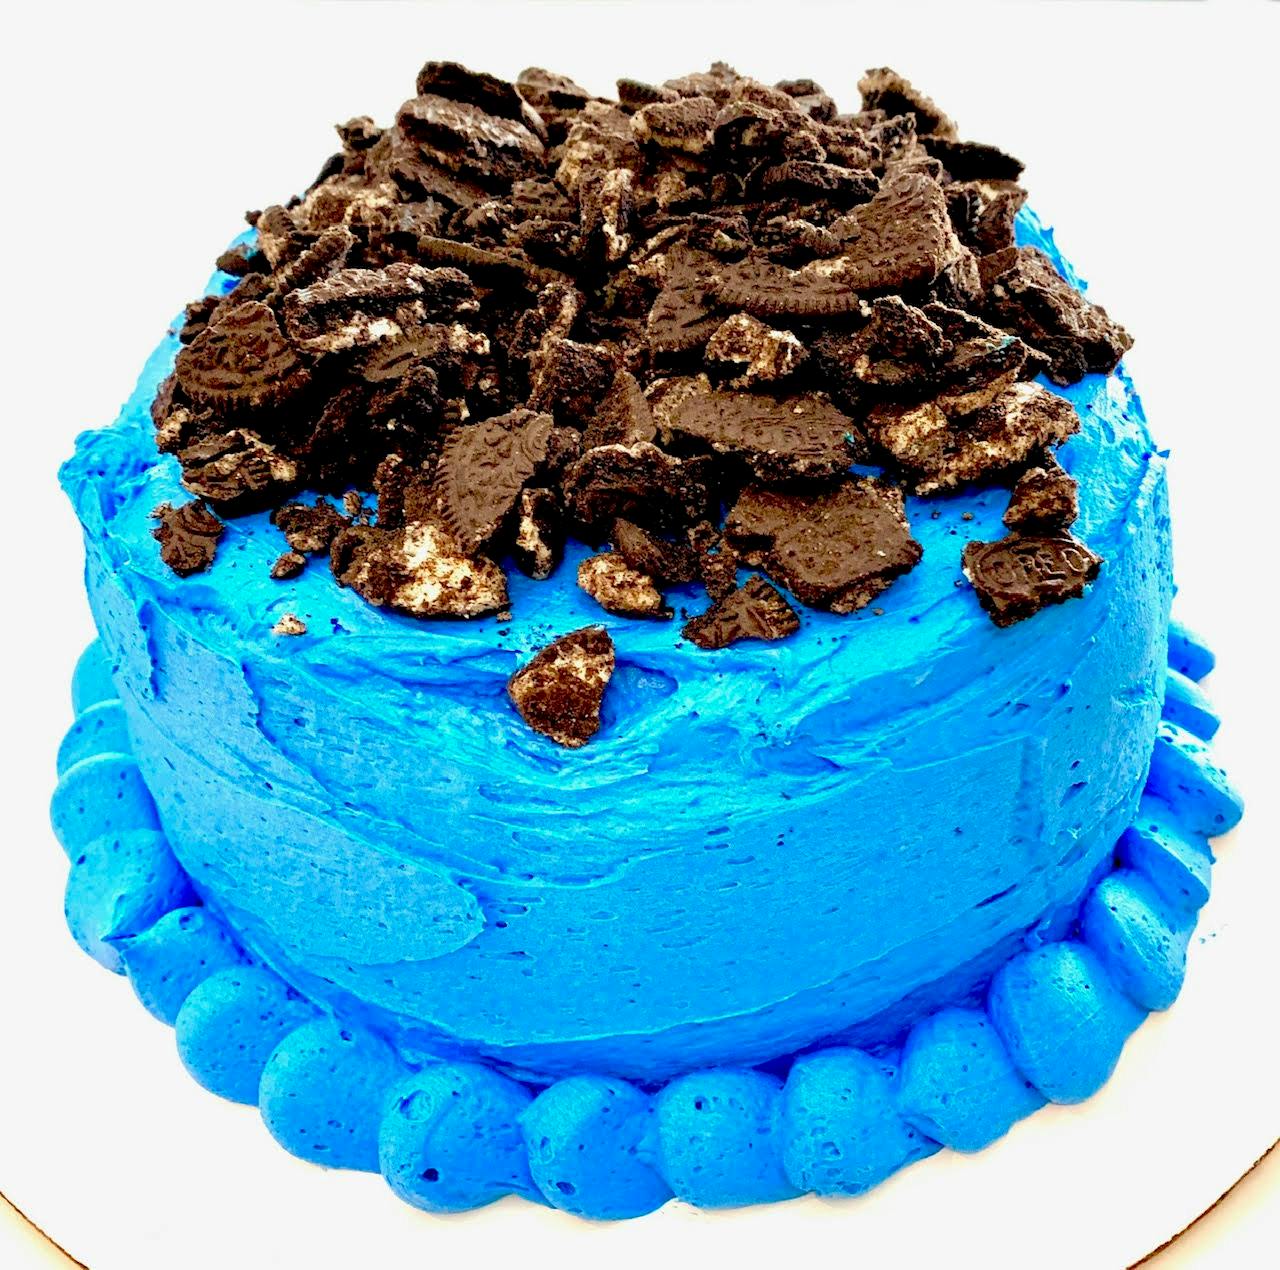 a blue cake with with chocolate pieces on top